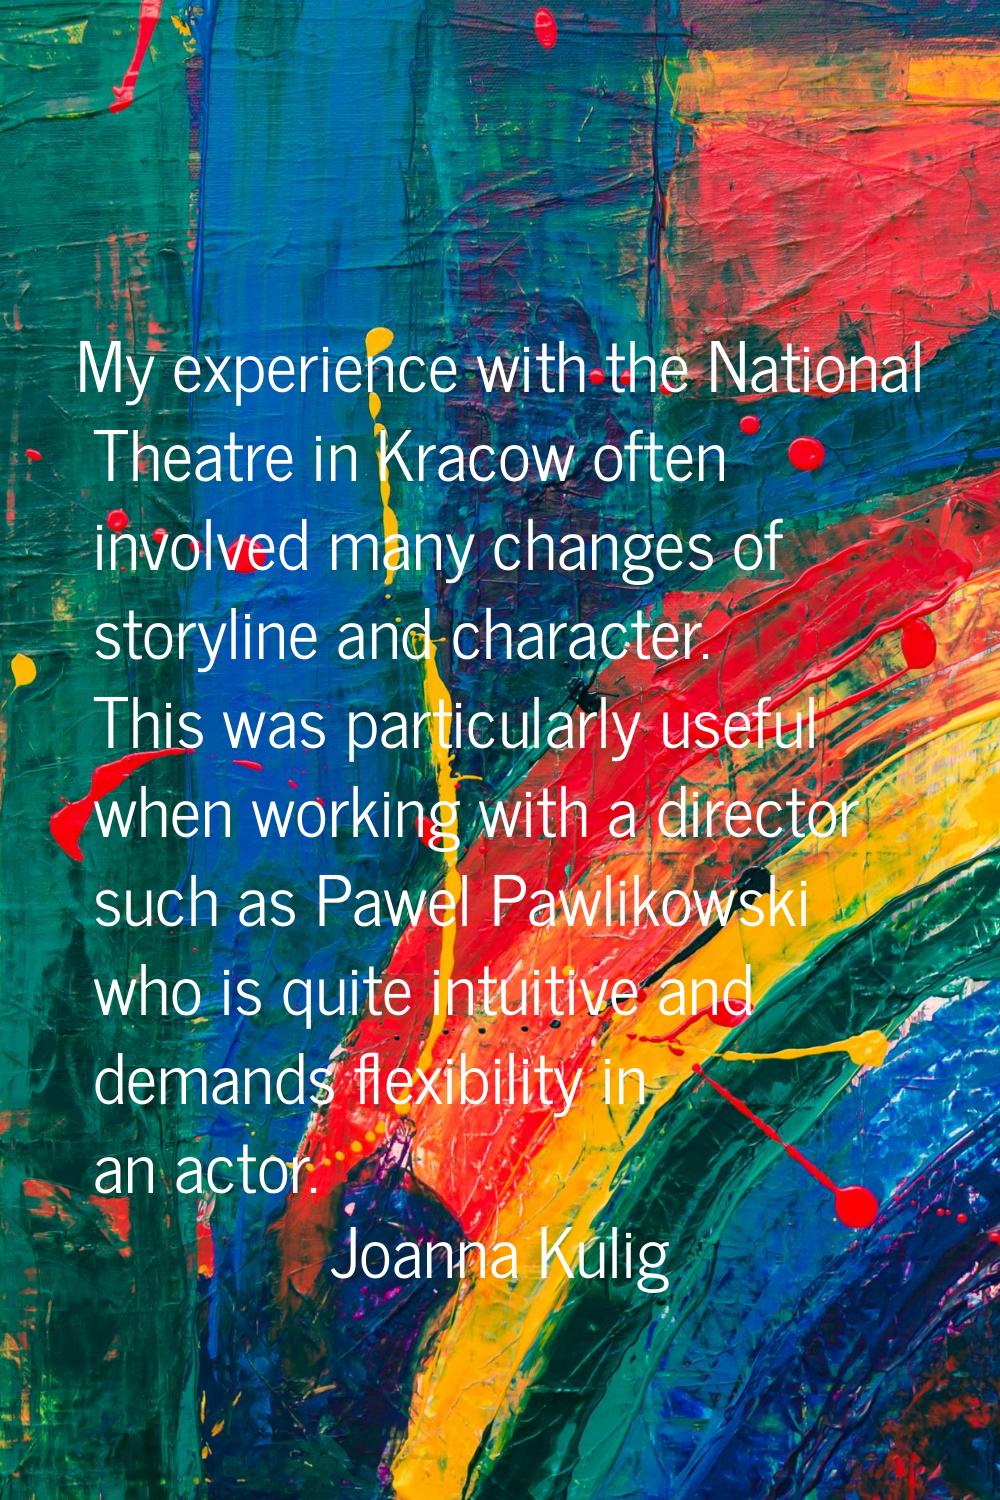 My experience with the National Theatre in Kracow often involved many changes of storyline and char